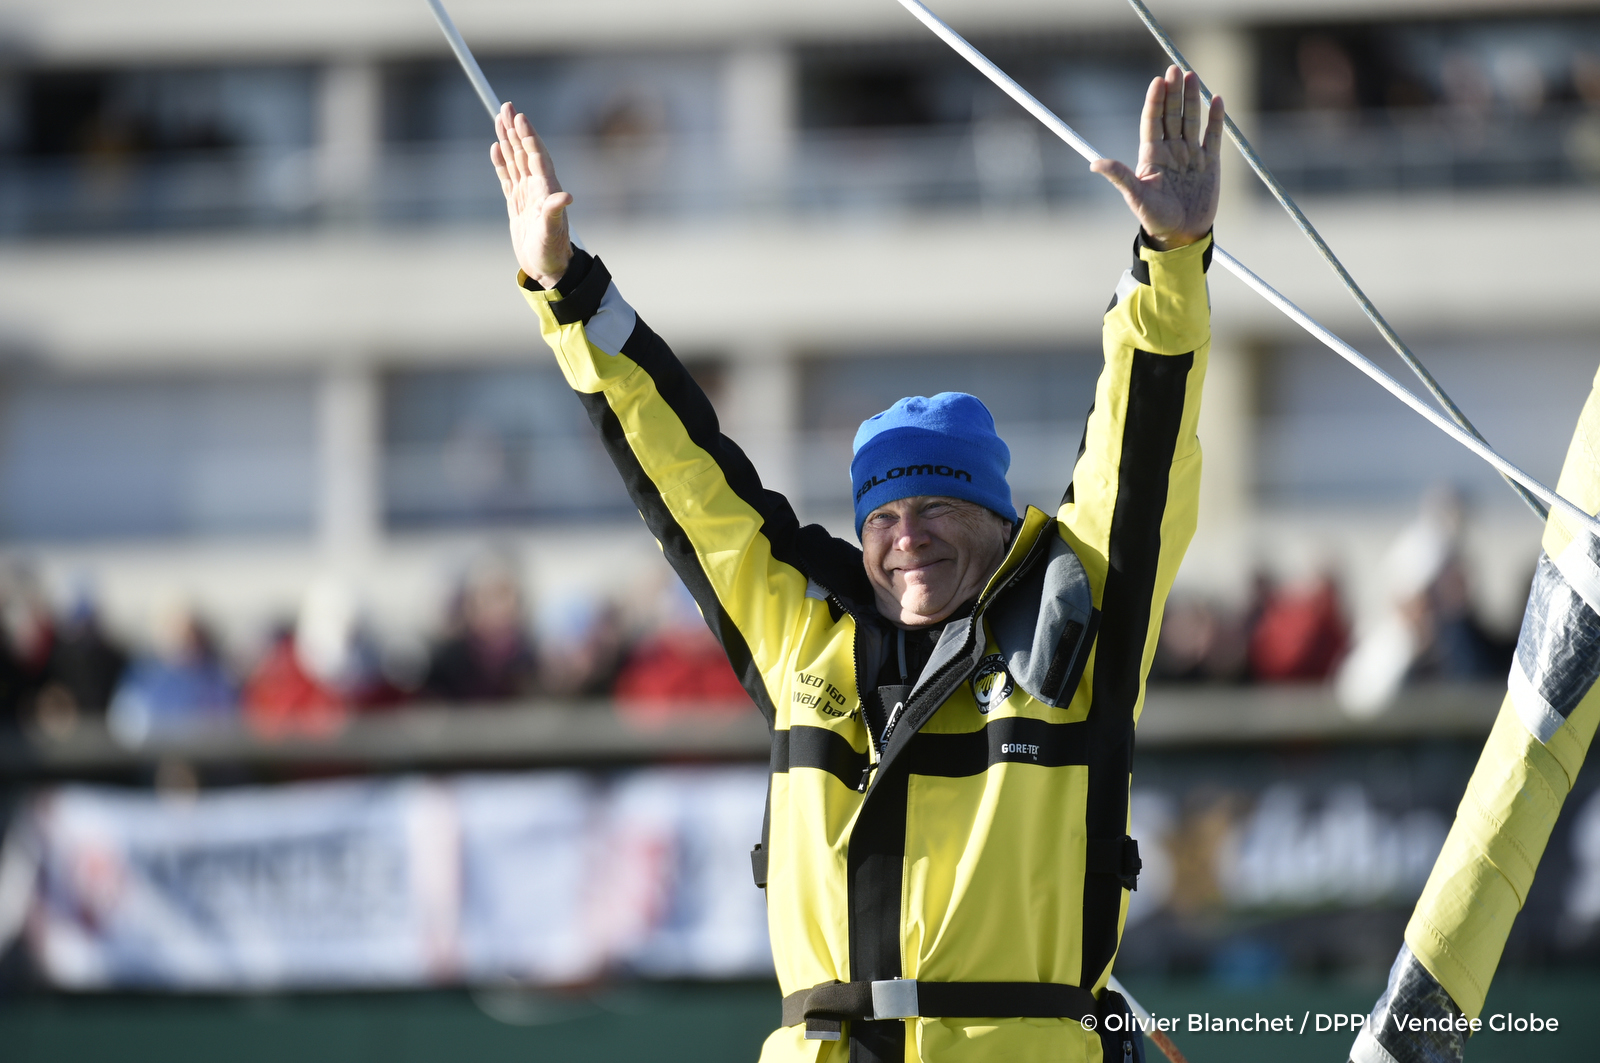 Pieter Heerema (NL), skipper No Way Back,, Ambiance channel start of the Vendee Globe, in Les Sables d'Olonne, France, on November 6th, 2016 - Photo Olivier Blanchet / DPPI / Vendee Globe Pieter Heerema (NL), skipper No Way Back,, Ambiance chenal départ du Vendée Globe, aux Sables d'Olonne le 6 Novembre 2016 - Photo Olivier Blanchet / DPPI / Vendee Globe